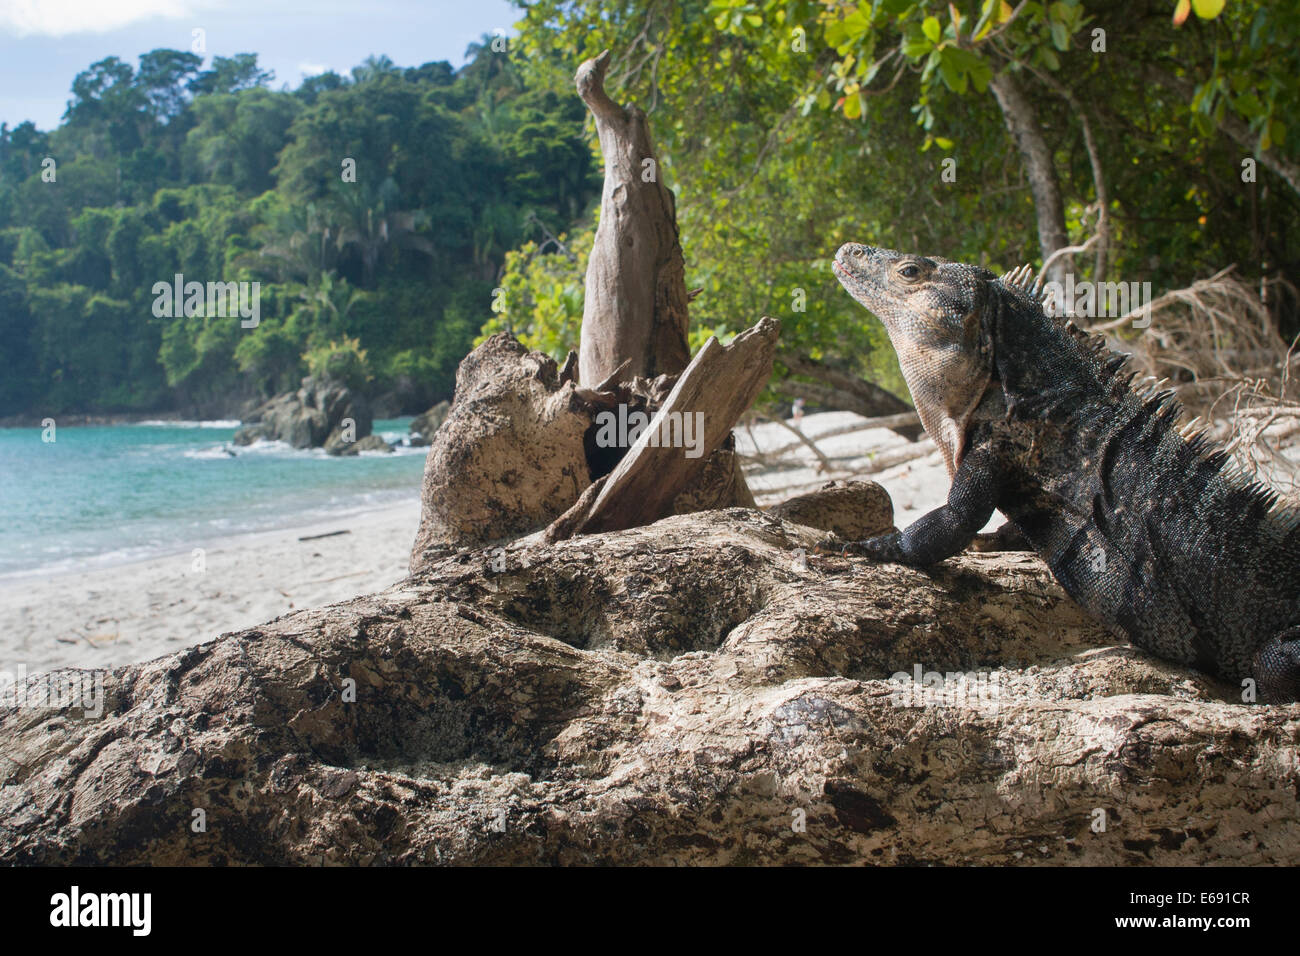 A magnificent male black spiny-tailed iguana (Ctenosaura similis) on the beach.  Photographed in Costa Rica. Stock Photo